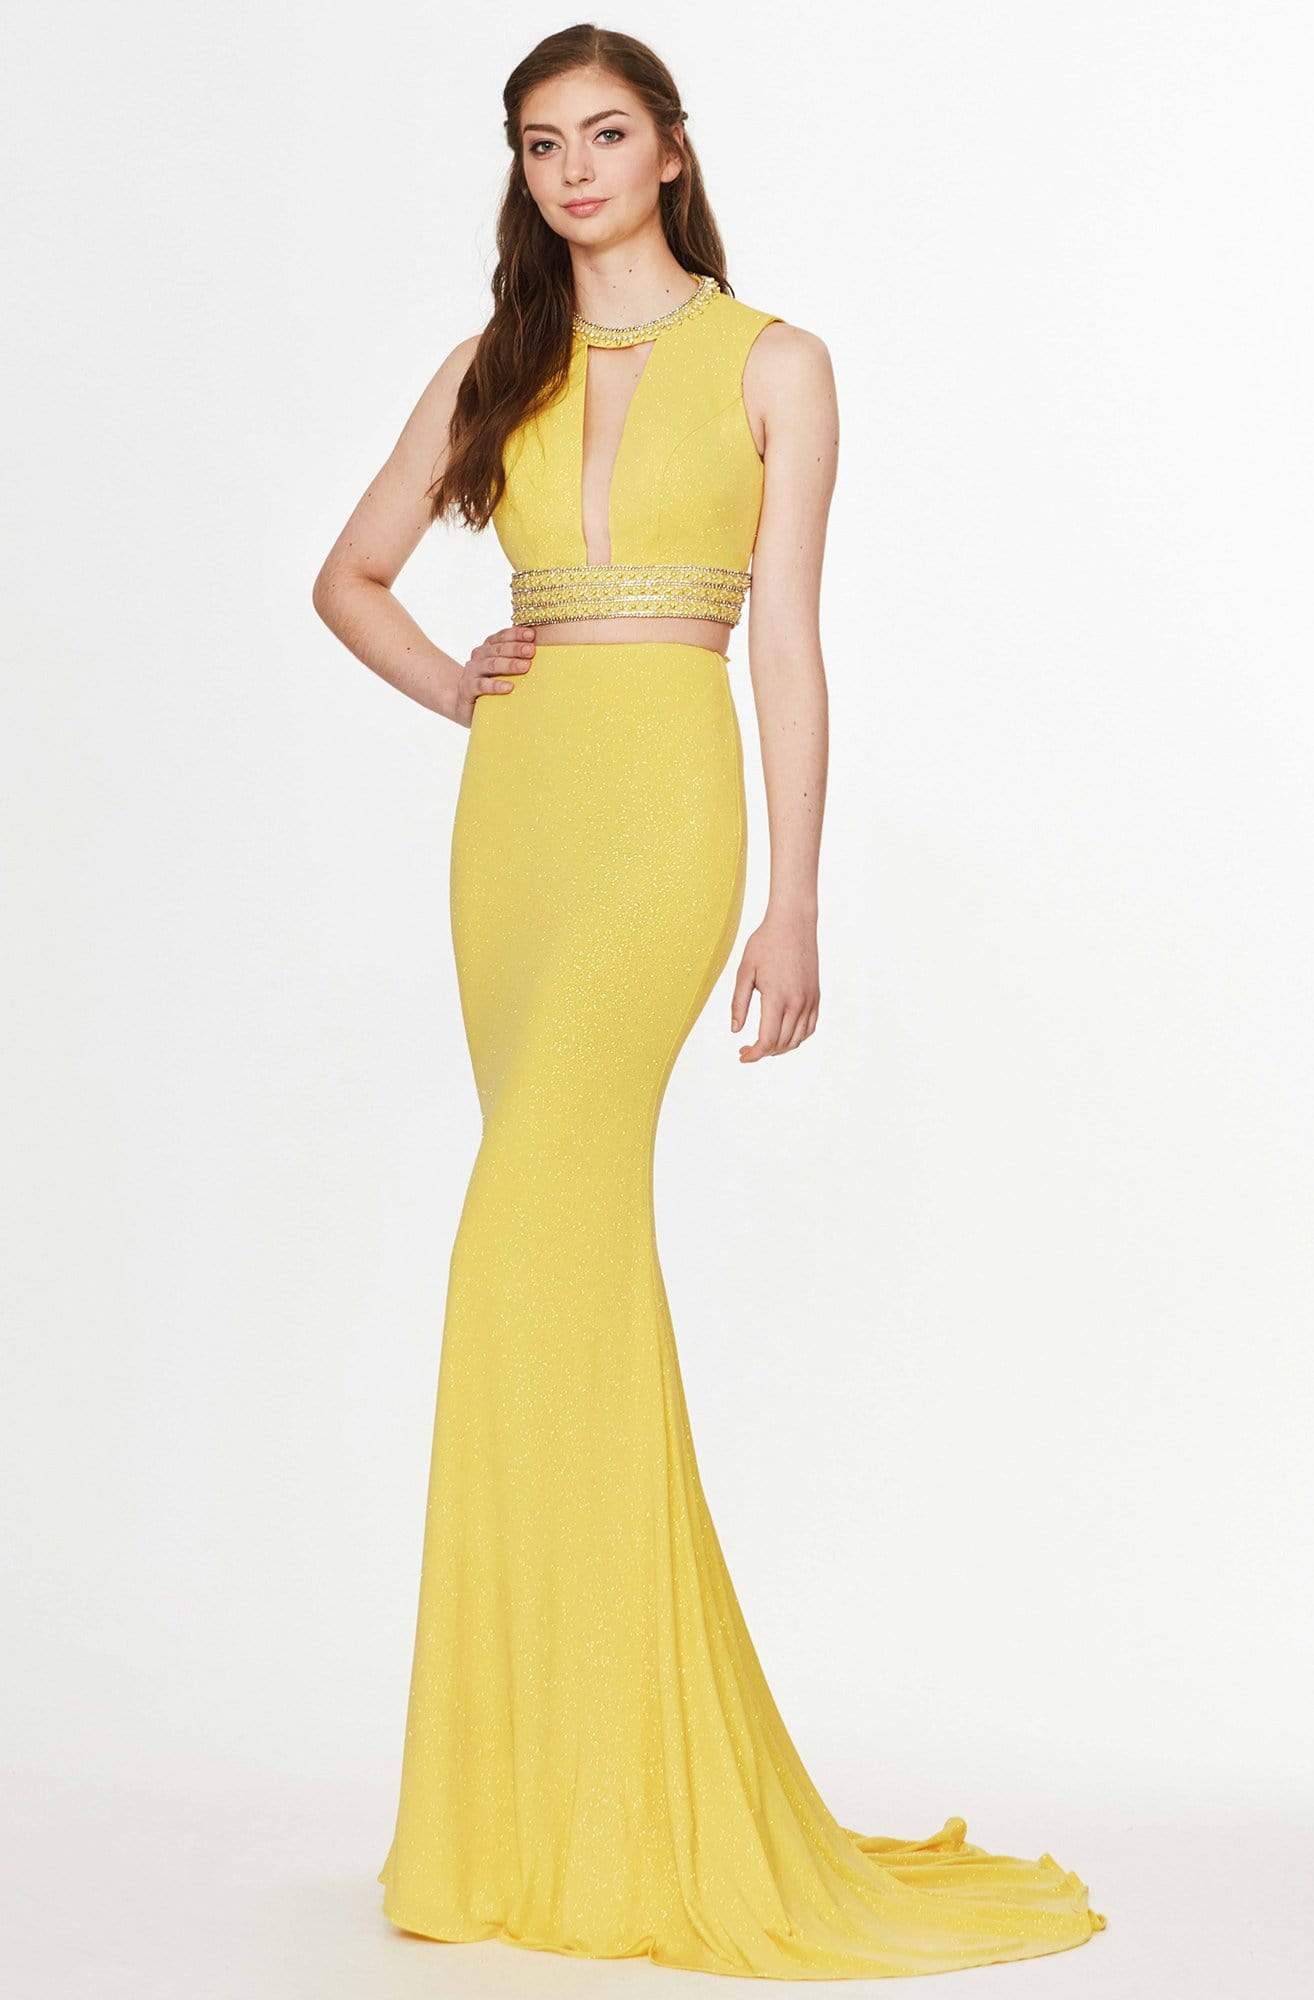 Angela & Alison - 91024 Beaded Plunging Cutout Mermaid Gown